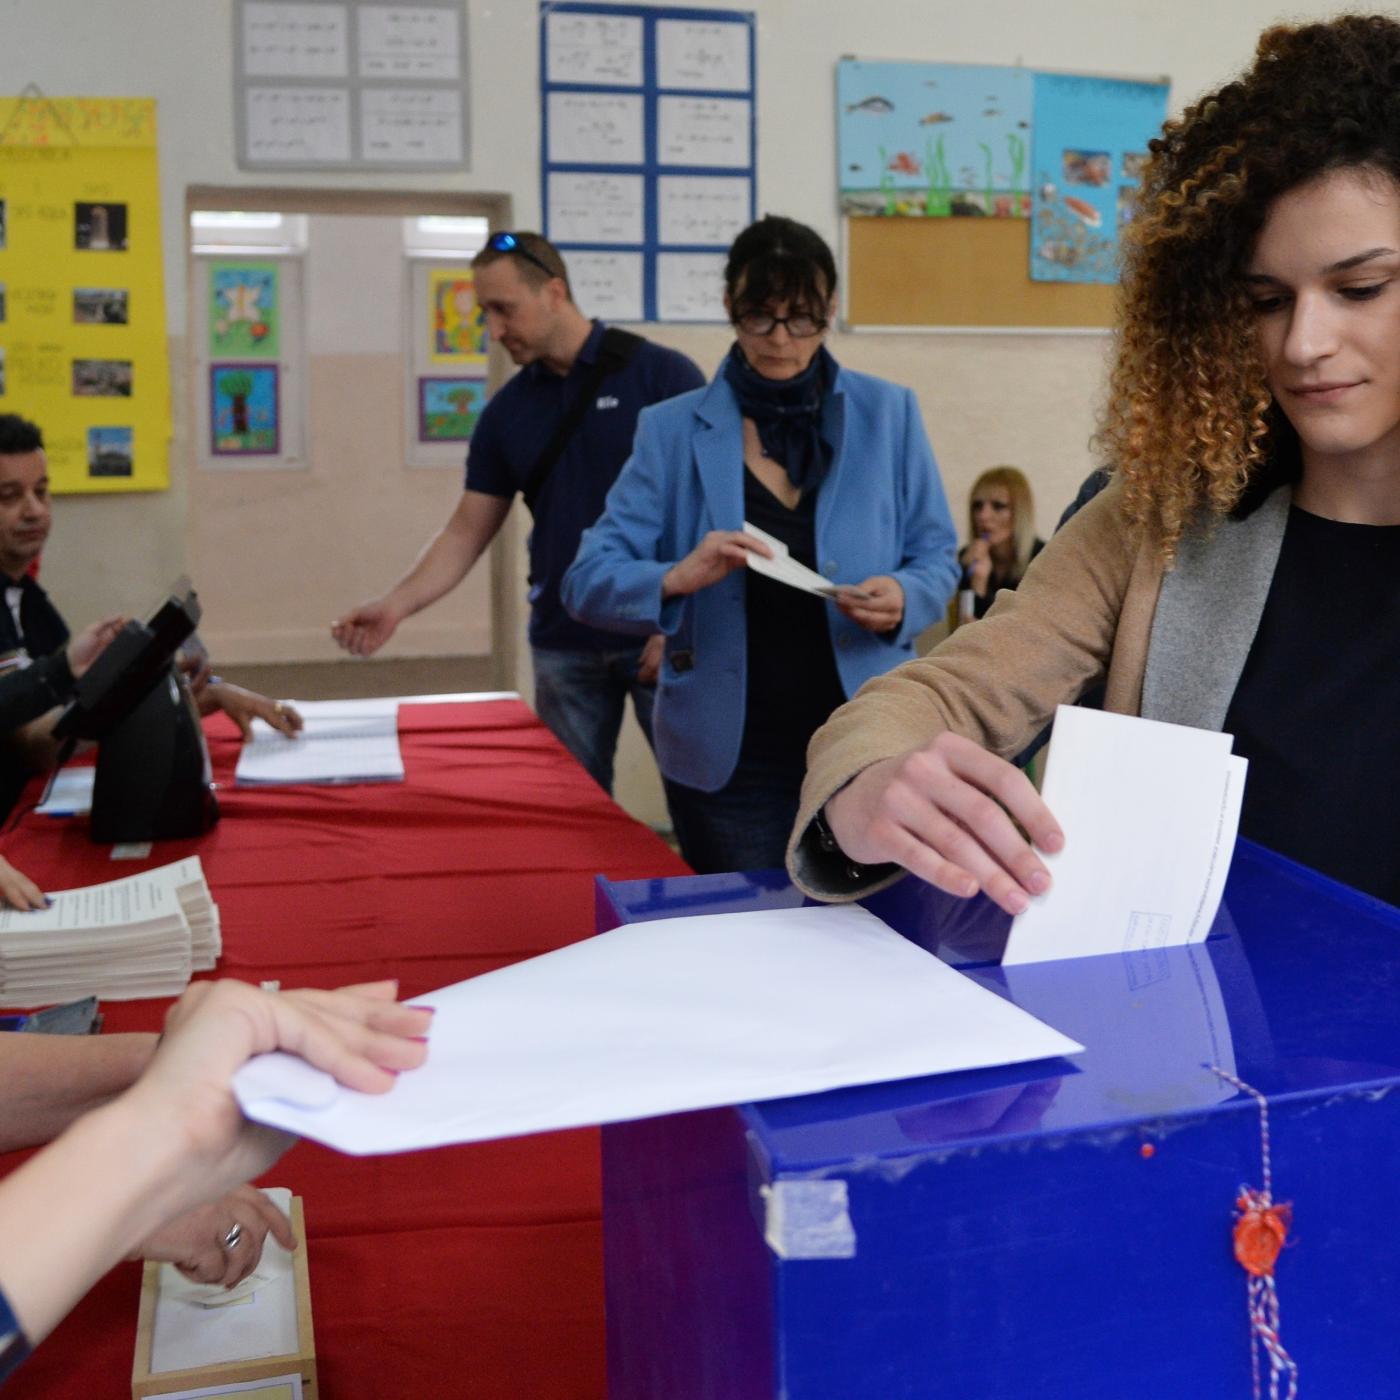 A woman votes in the Montenegrin presidential election at a polling station in Podgorica.